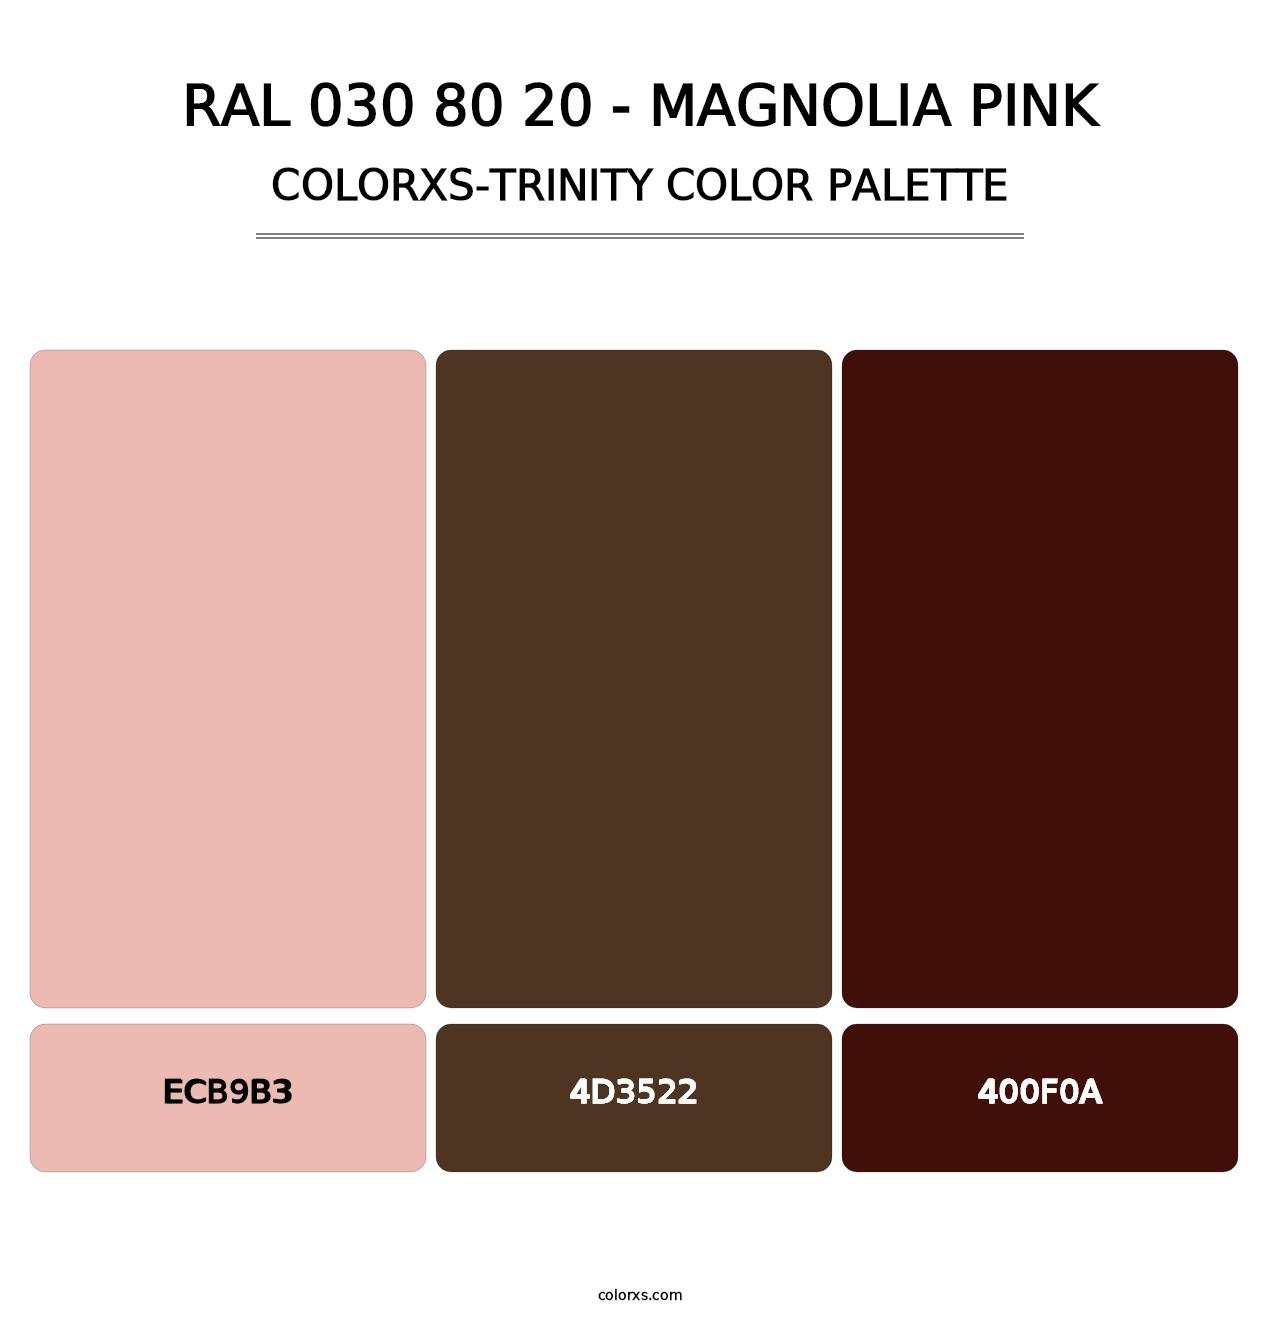 RAL 030 80 20 - Magnolia Pink - Colorxs Trinity Palette